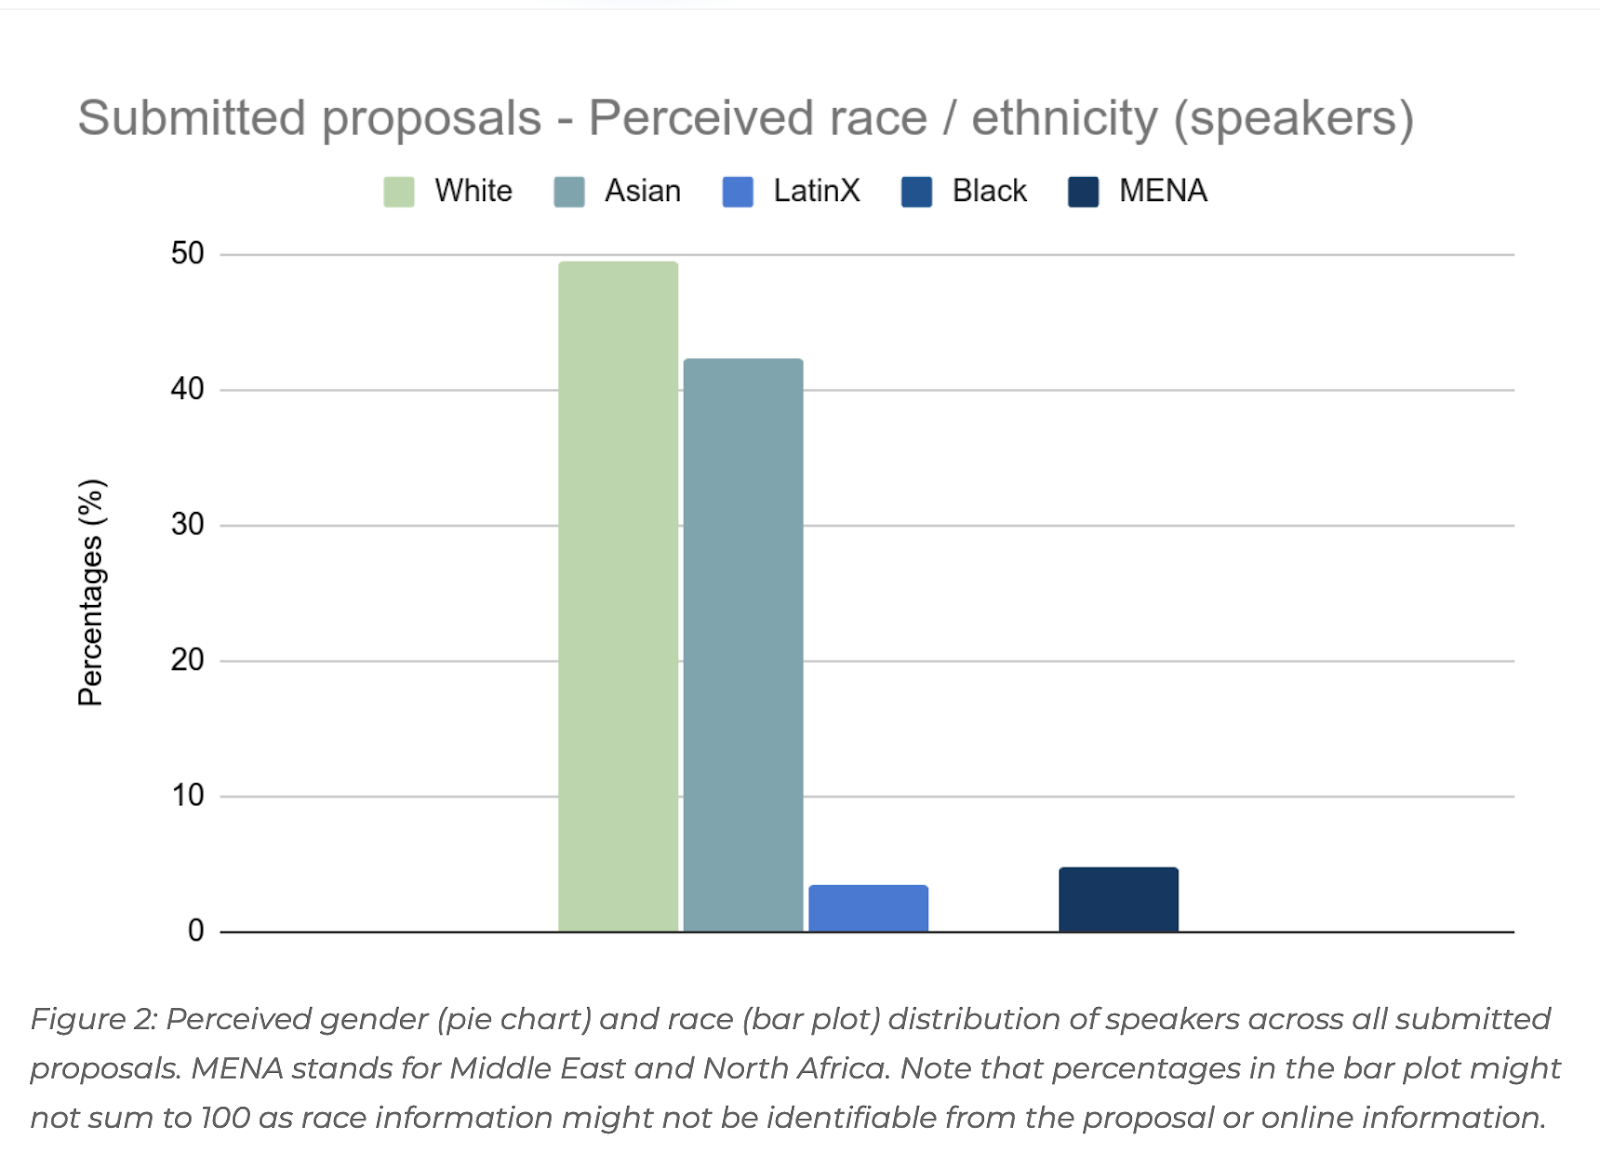 Bar chart of submitted proposals grouped by perceived race/ethnicity of speakers.